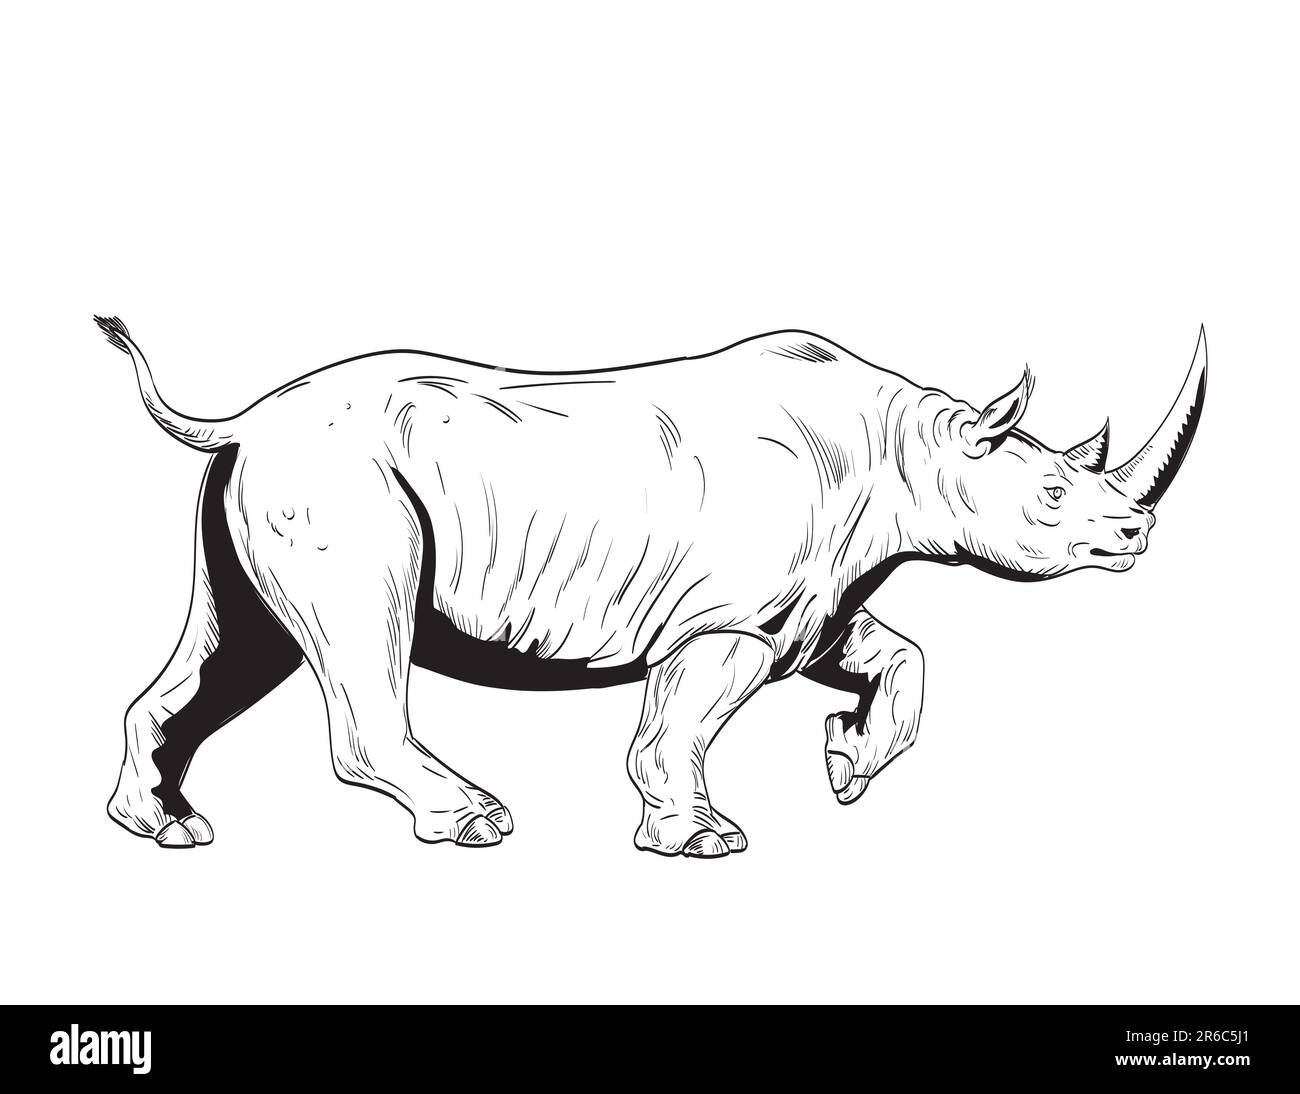 Comics style drawing or illustration of a rhinoceros or rhino, an odd-toed ungulates in the family Rhinocerotidae, charging viewed from side isolated Stock Photo